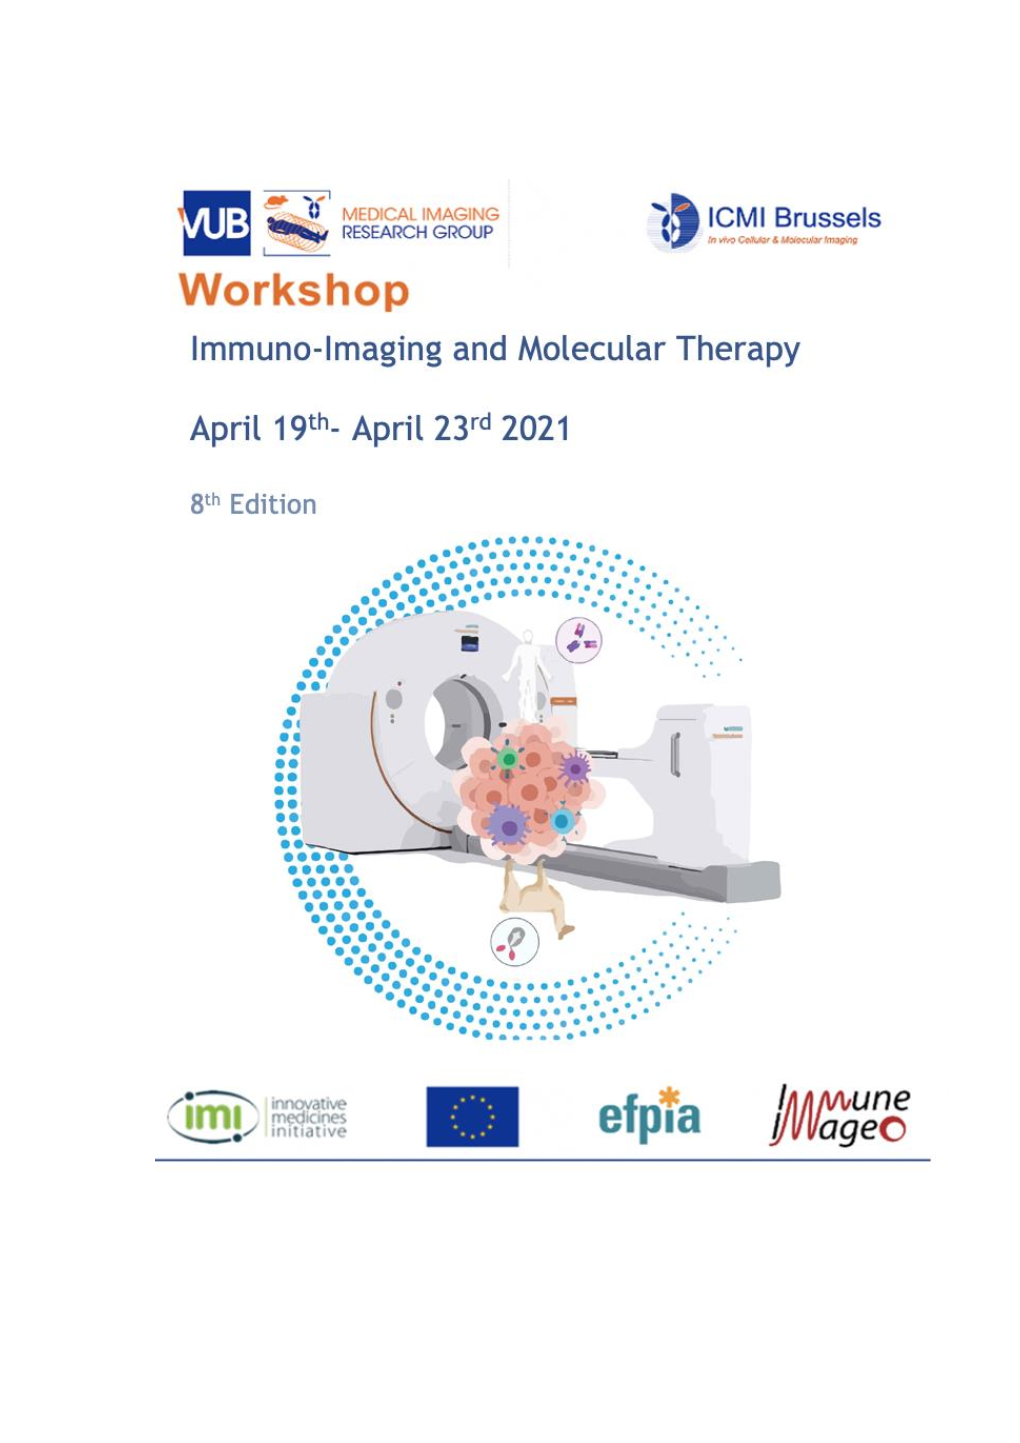 Online Workshop Immuno-Imaging and Molecular Therapy